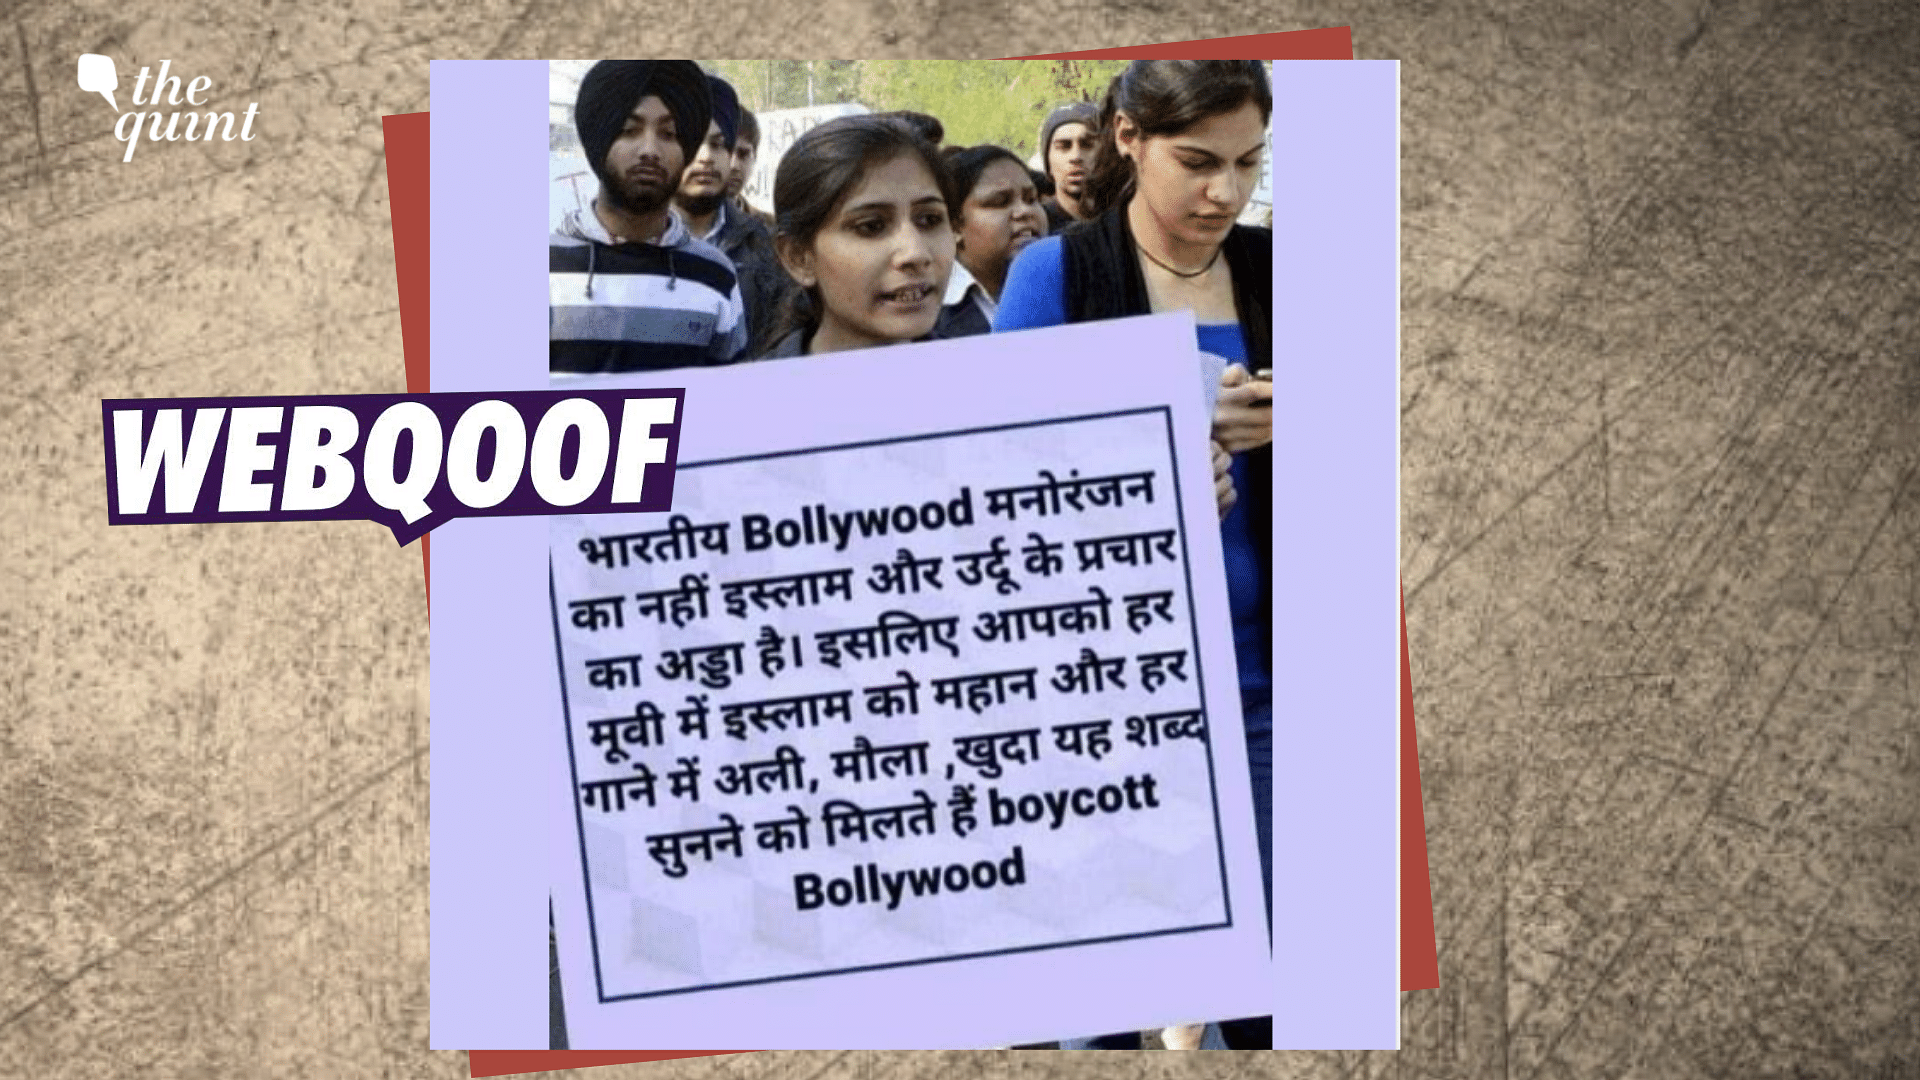 <div class="paragraphs"><p>Fact-Check |&nbsp;The original image, which dates back to December 2012, was from a protest following the 'Nirbhaya' gangrape case and not against Bollywood.</p></div>